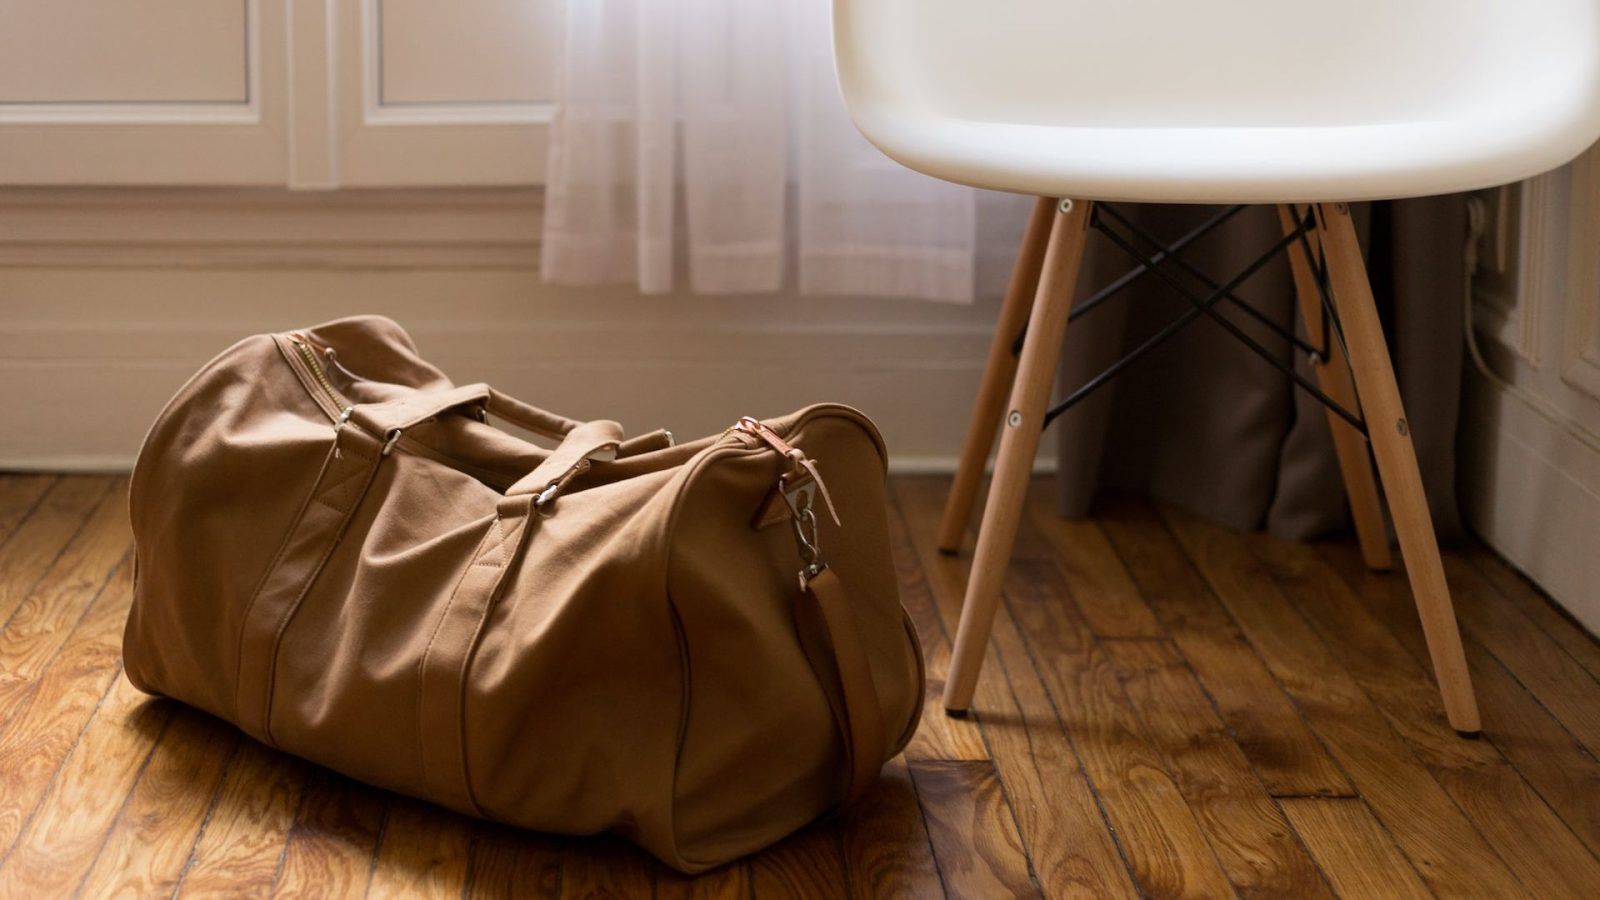 The 15 highest rated luggage on Amazon